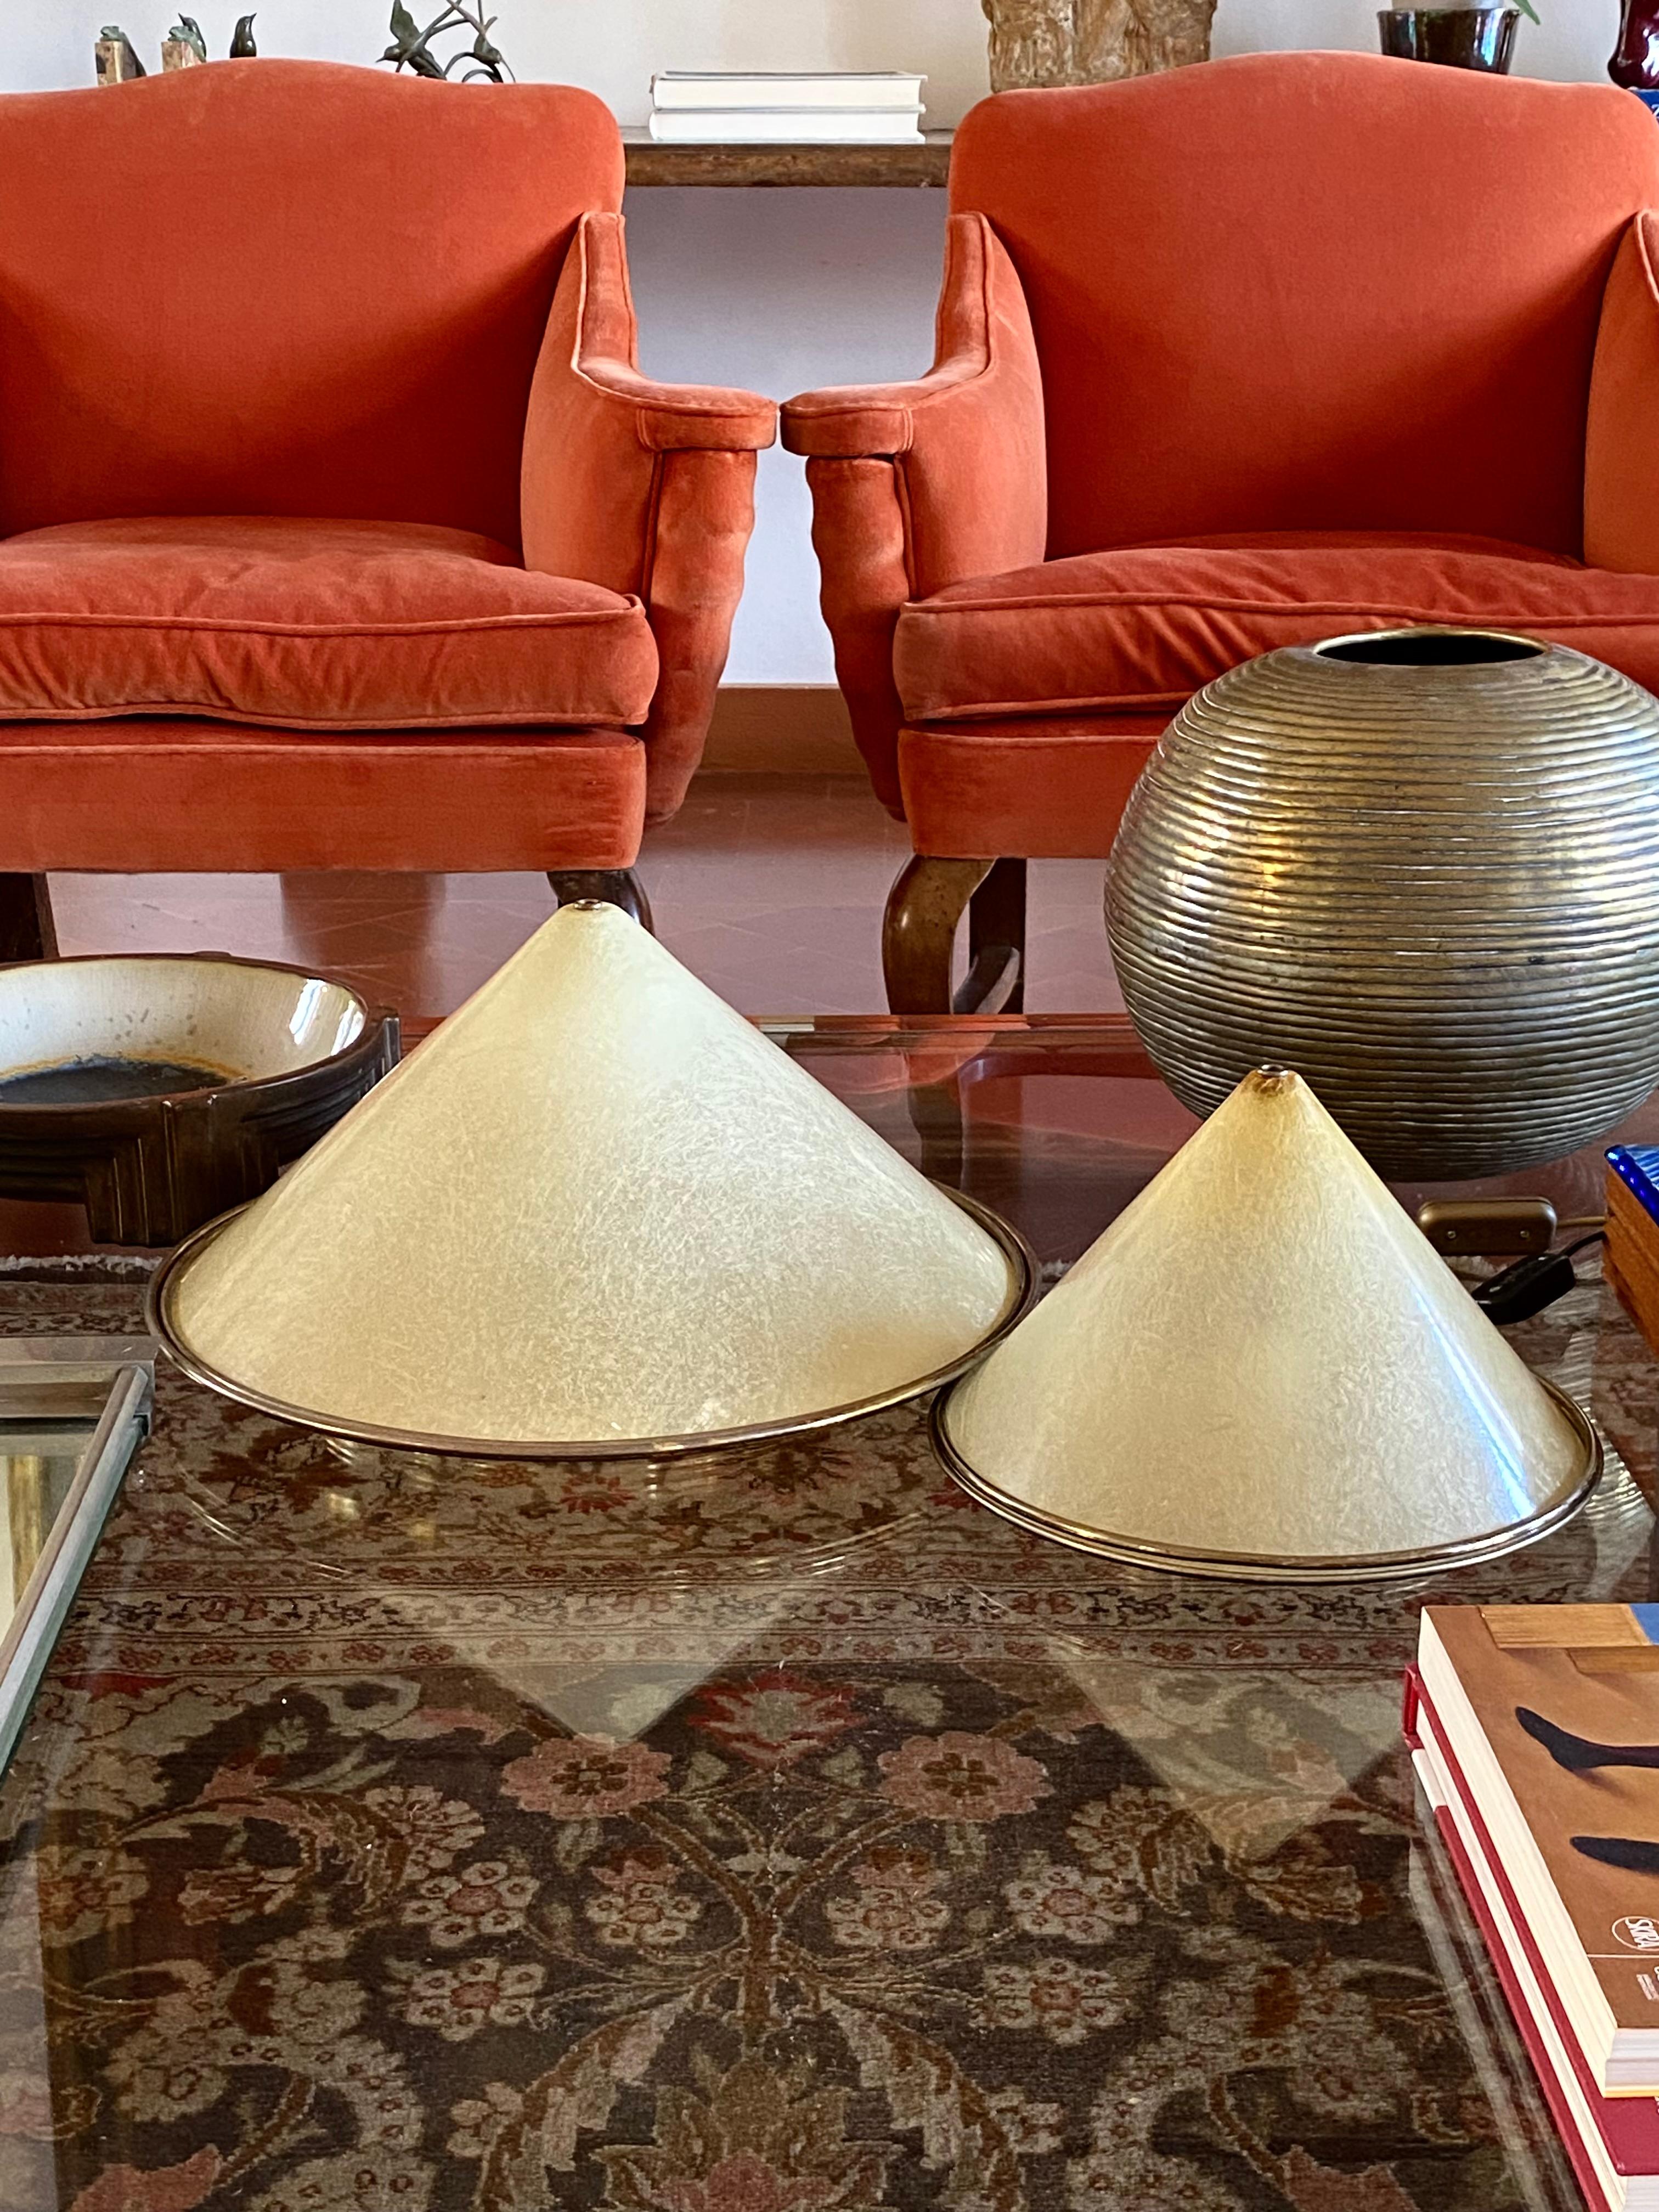 Hollywood regency set of 2 conic shaped fiberglass and brass table lamps

Italy 1970 ca.

Brass, fibreglass

H 20 x 25 cm diam.

H 23 x 36 cm diam.

Conditions: very good consistent with age and use.